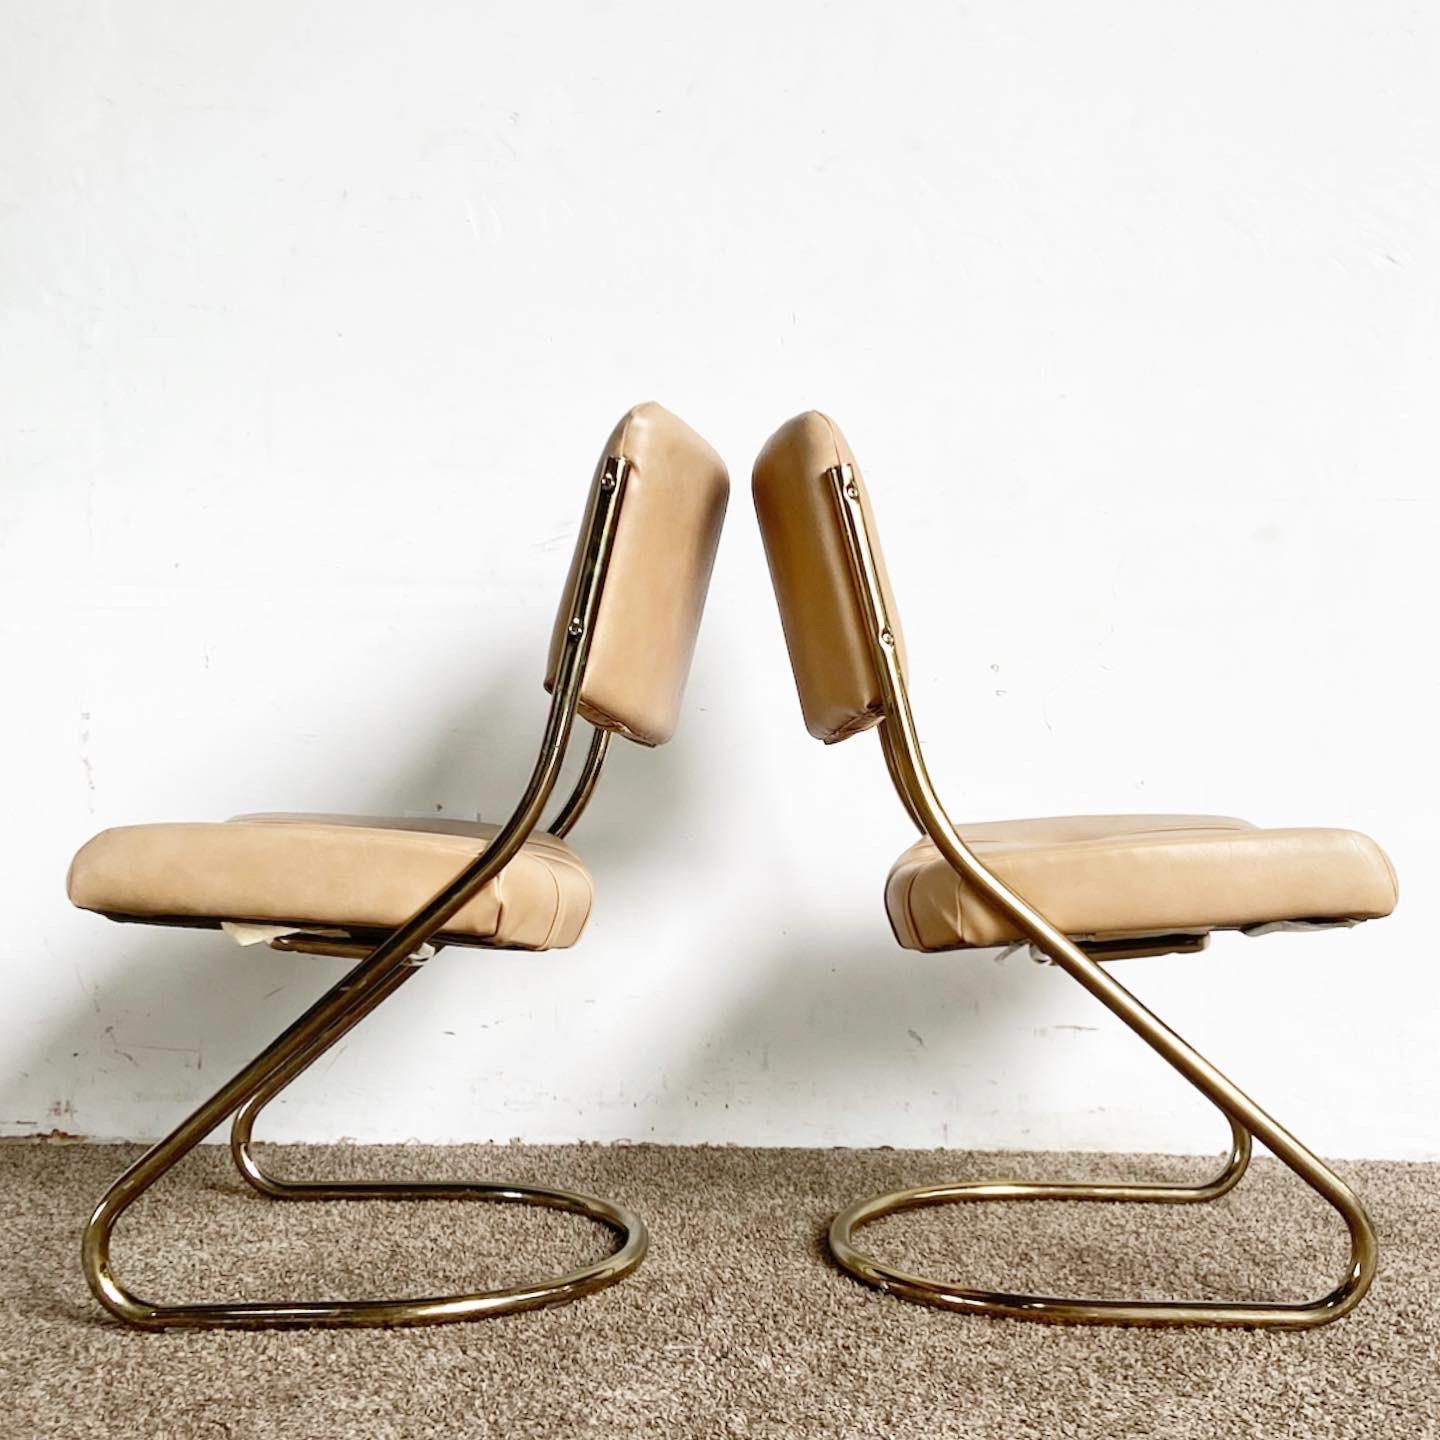 Elevate your decor with our Mid Century Modern Cantilever Chairs by Chromcraft. Their gold frames and tan upholstery offer an inviting, vintage look.

Pair of Mid Century Modern Cantilever Chairs by Chromcraft.
Features gold frames for a vintage,